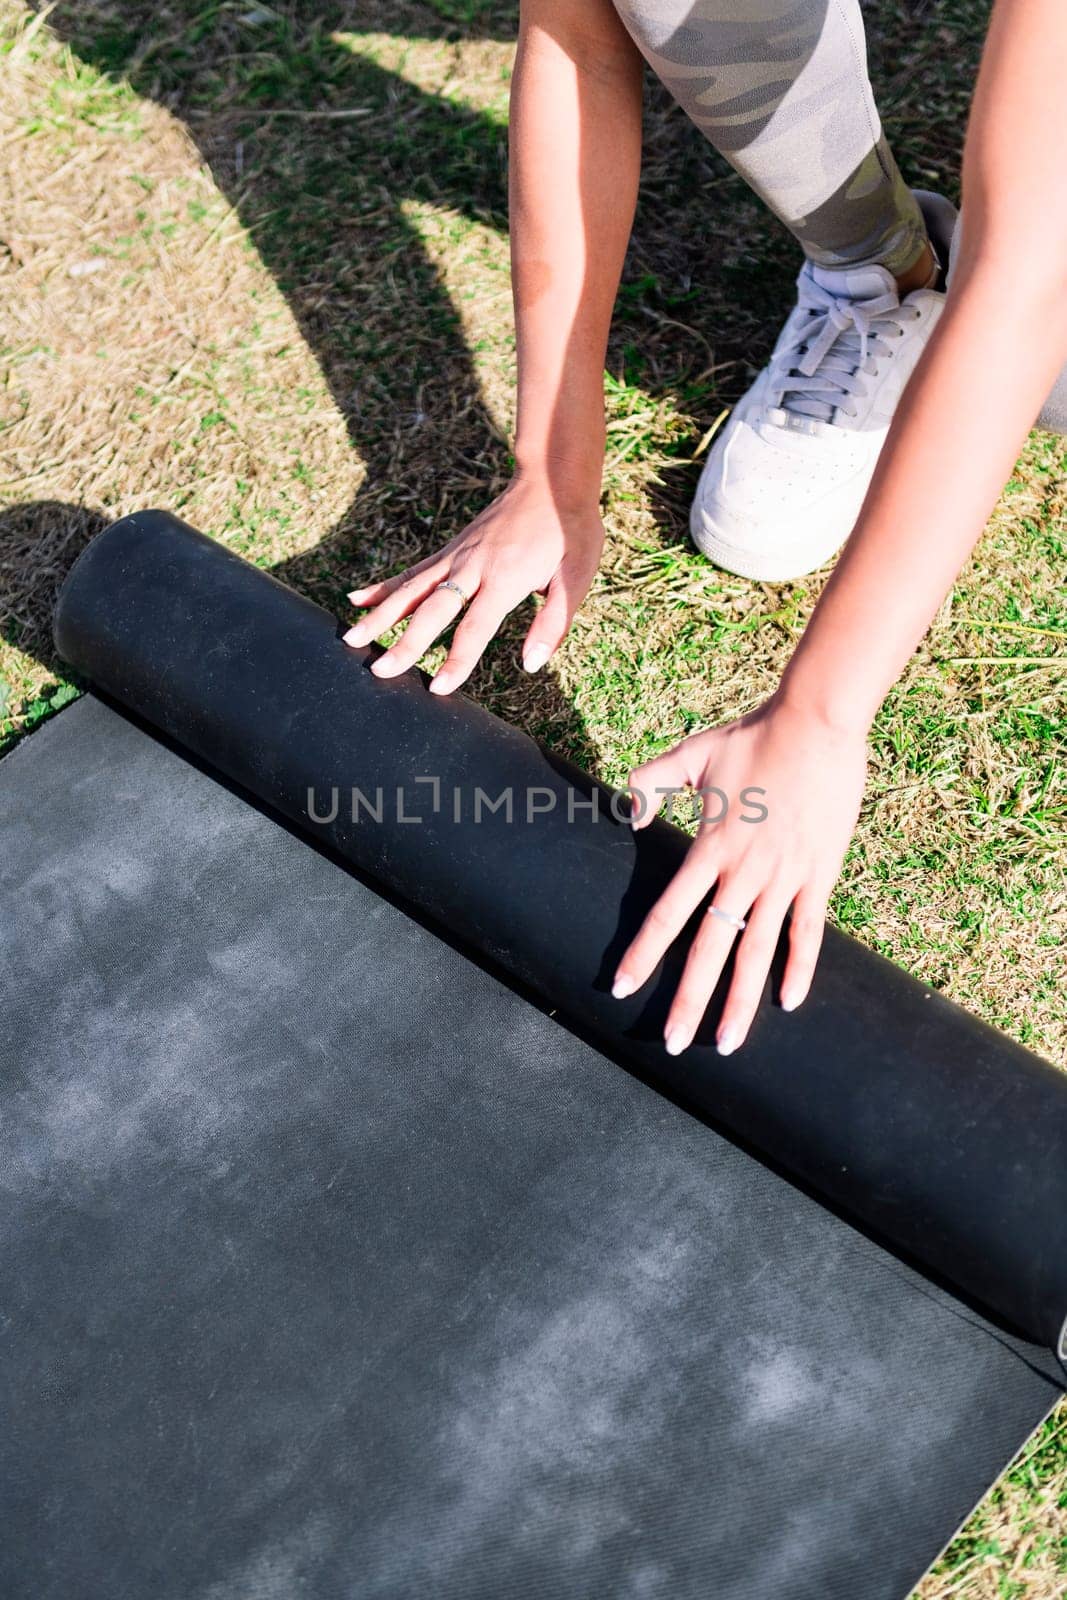 hands of a woman rolling mat for a yoga session by raulmelldo